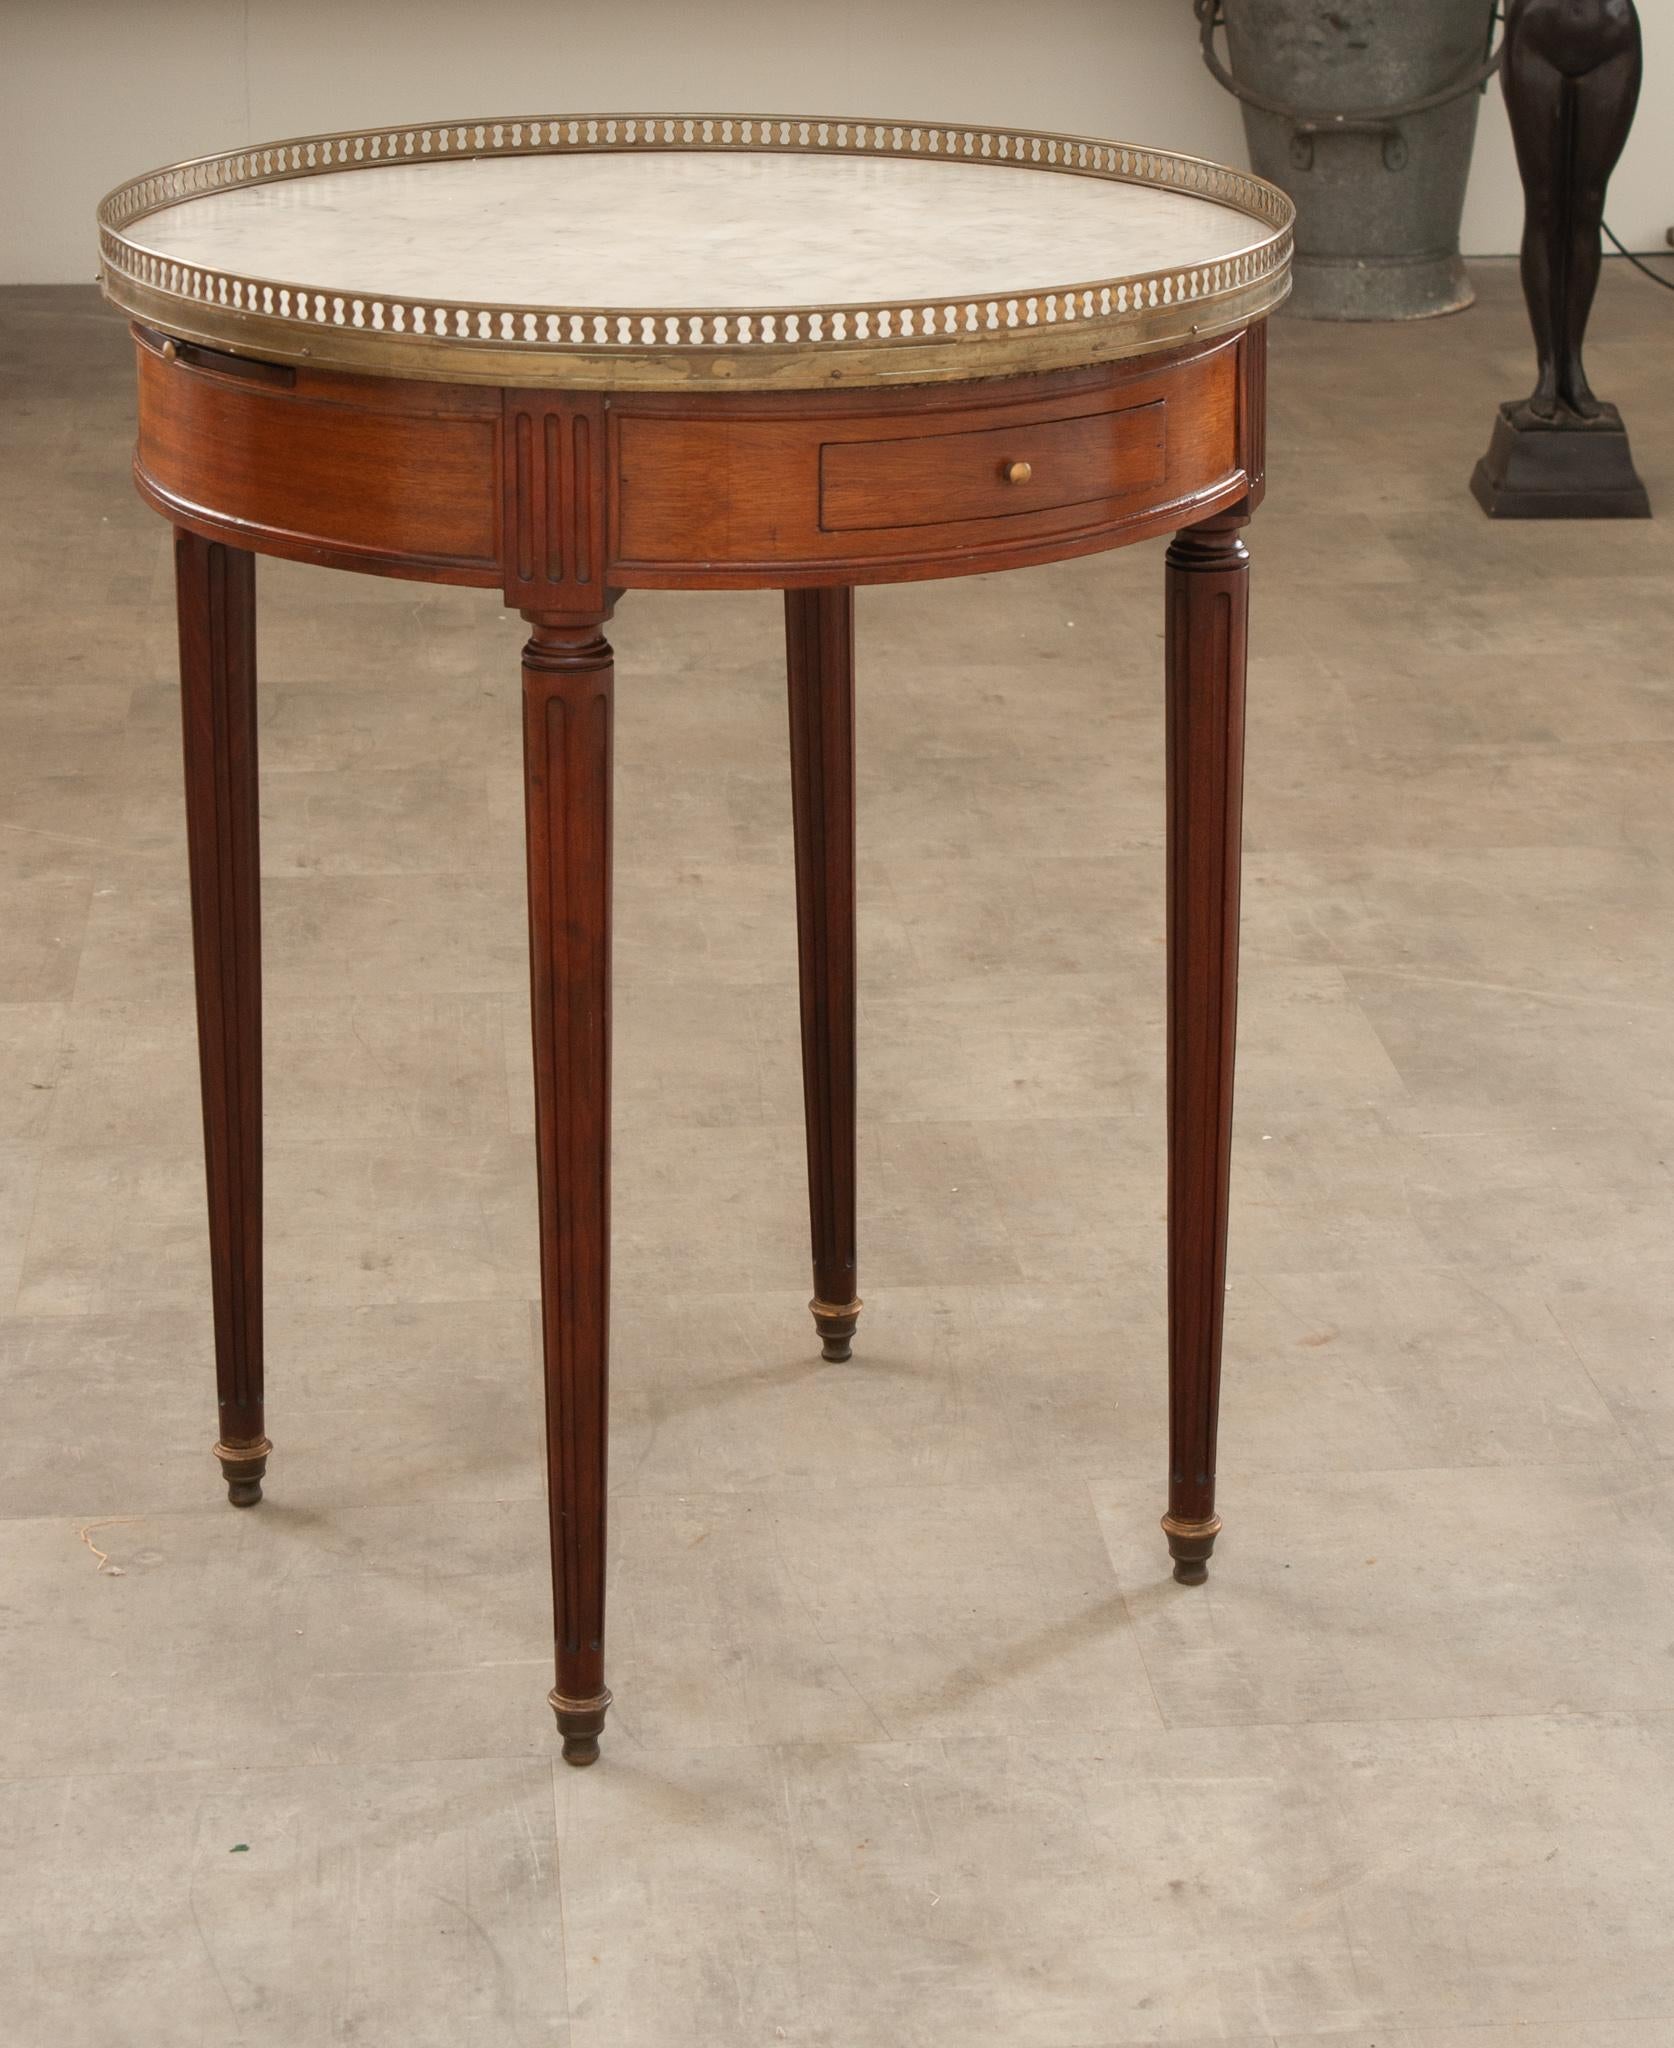 A charming French mahogany Gueridon Bouillotte table originally used for playing cards. Topped with white marble and surrounded by a pierced brass gallery that’s nicely patinated. Two drawers and two slides are housed within the apron, all with